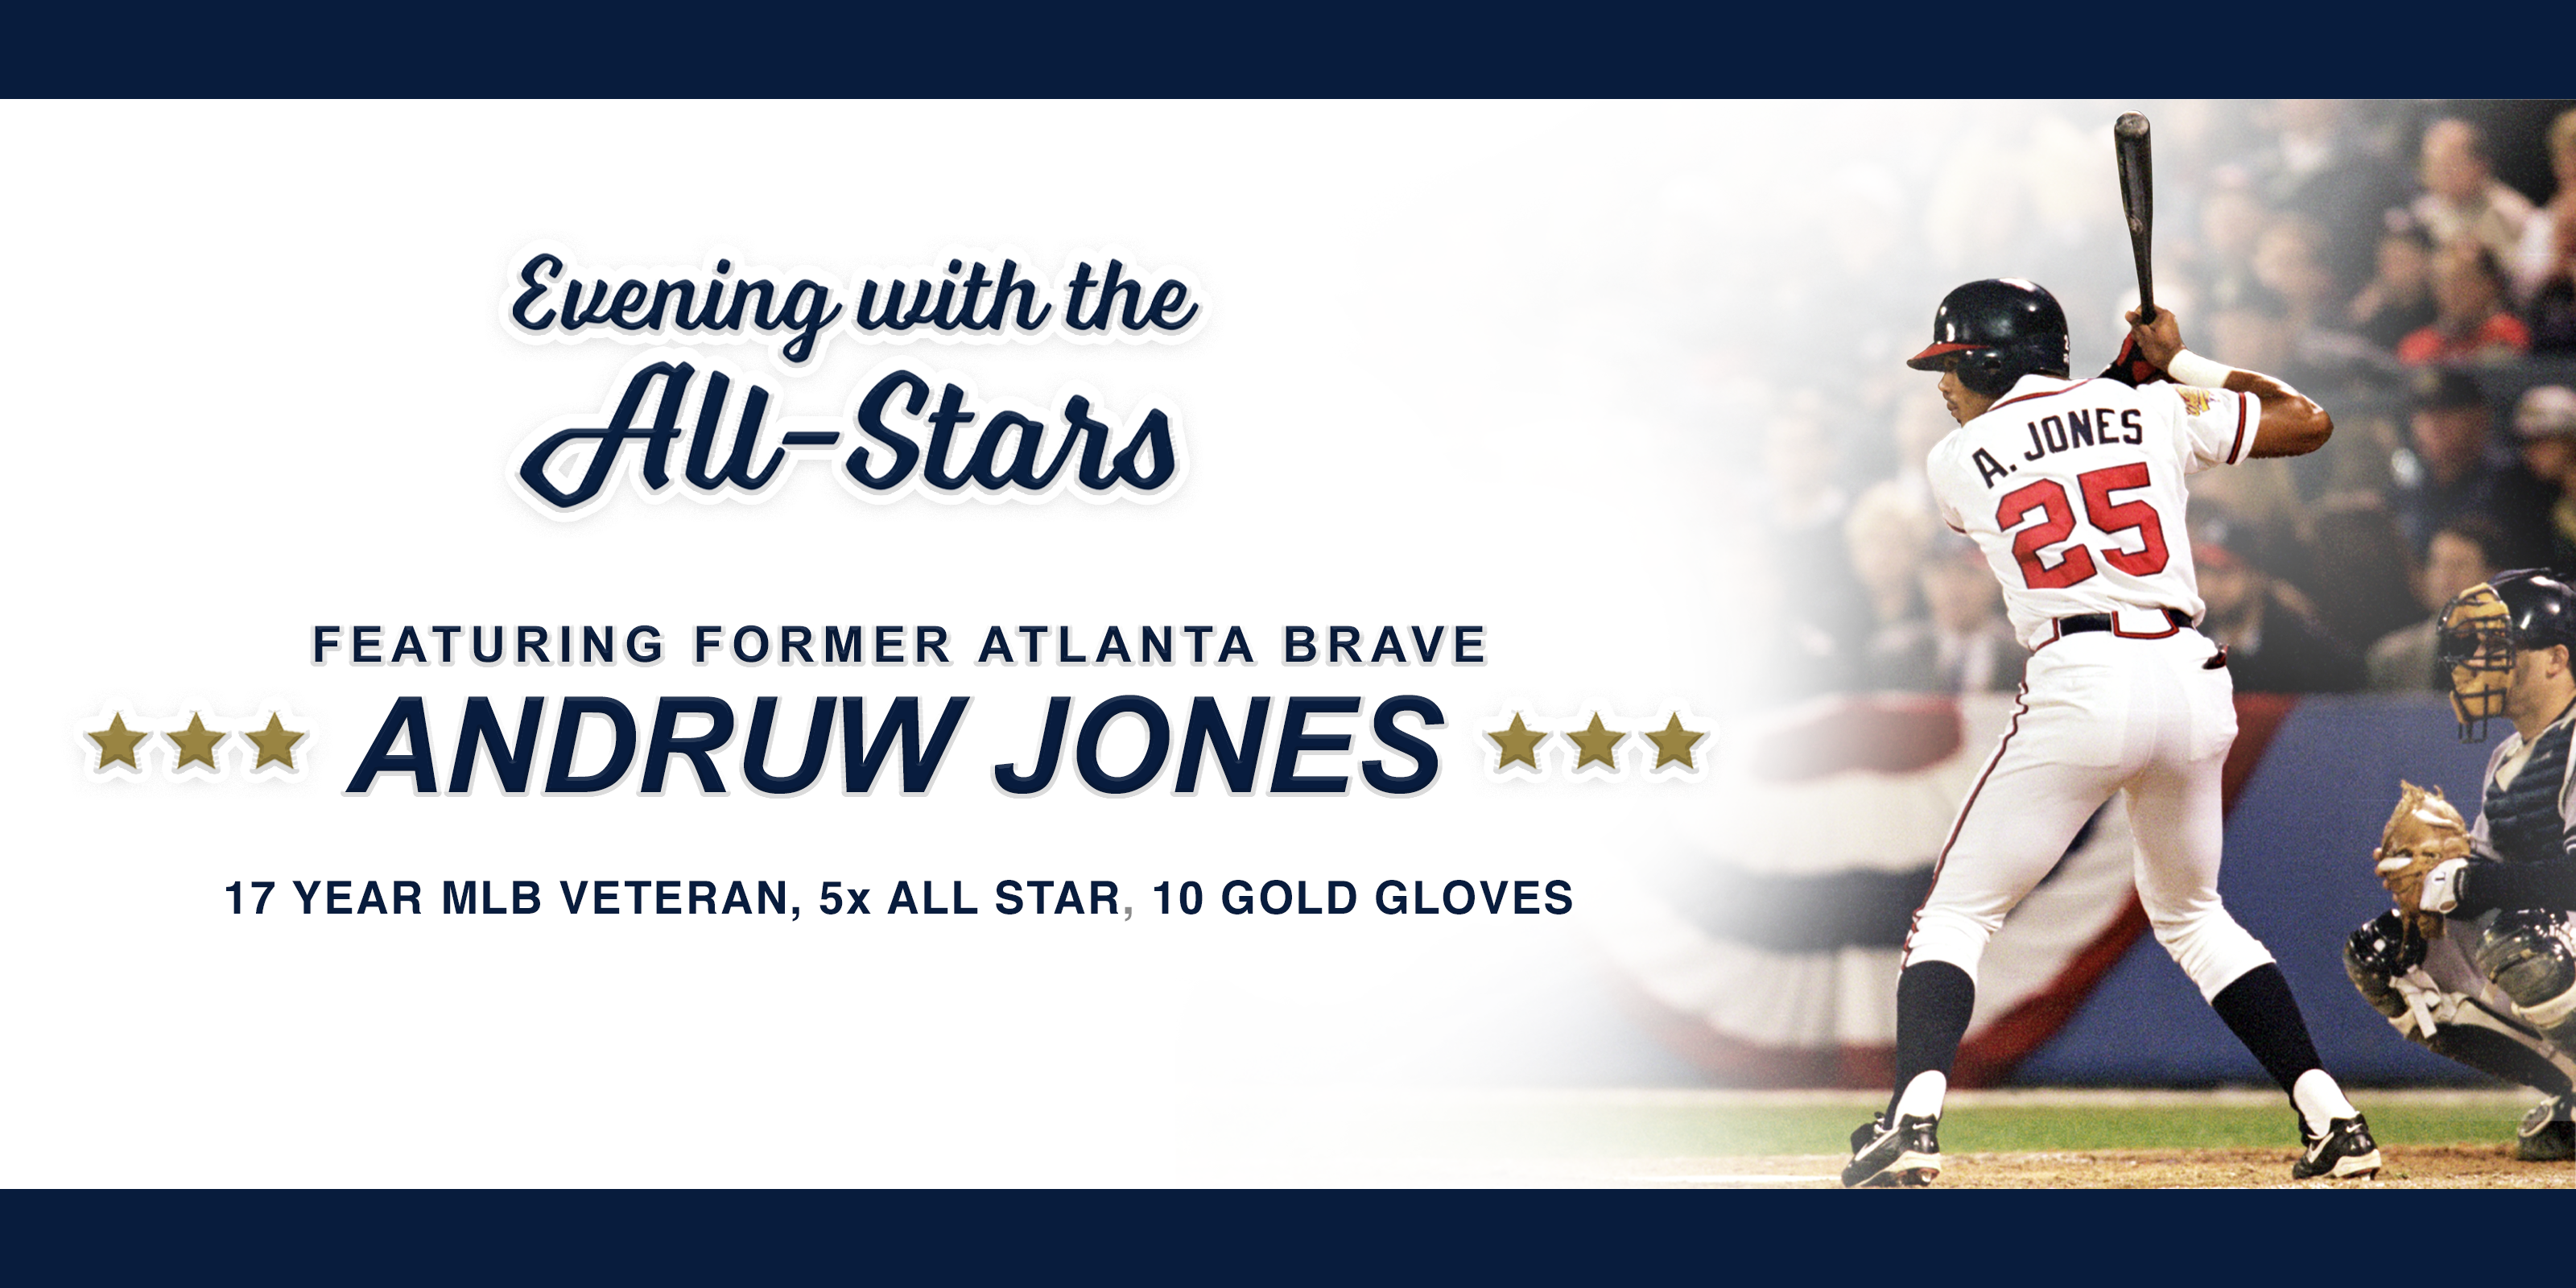 Andruw Jones to appear at GS Baseball Evening with the All-Stars